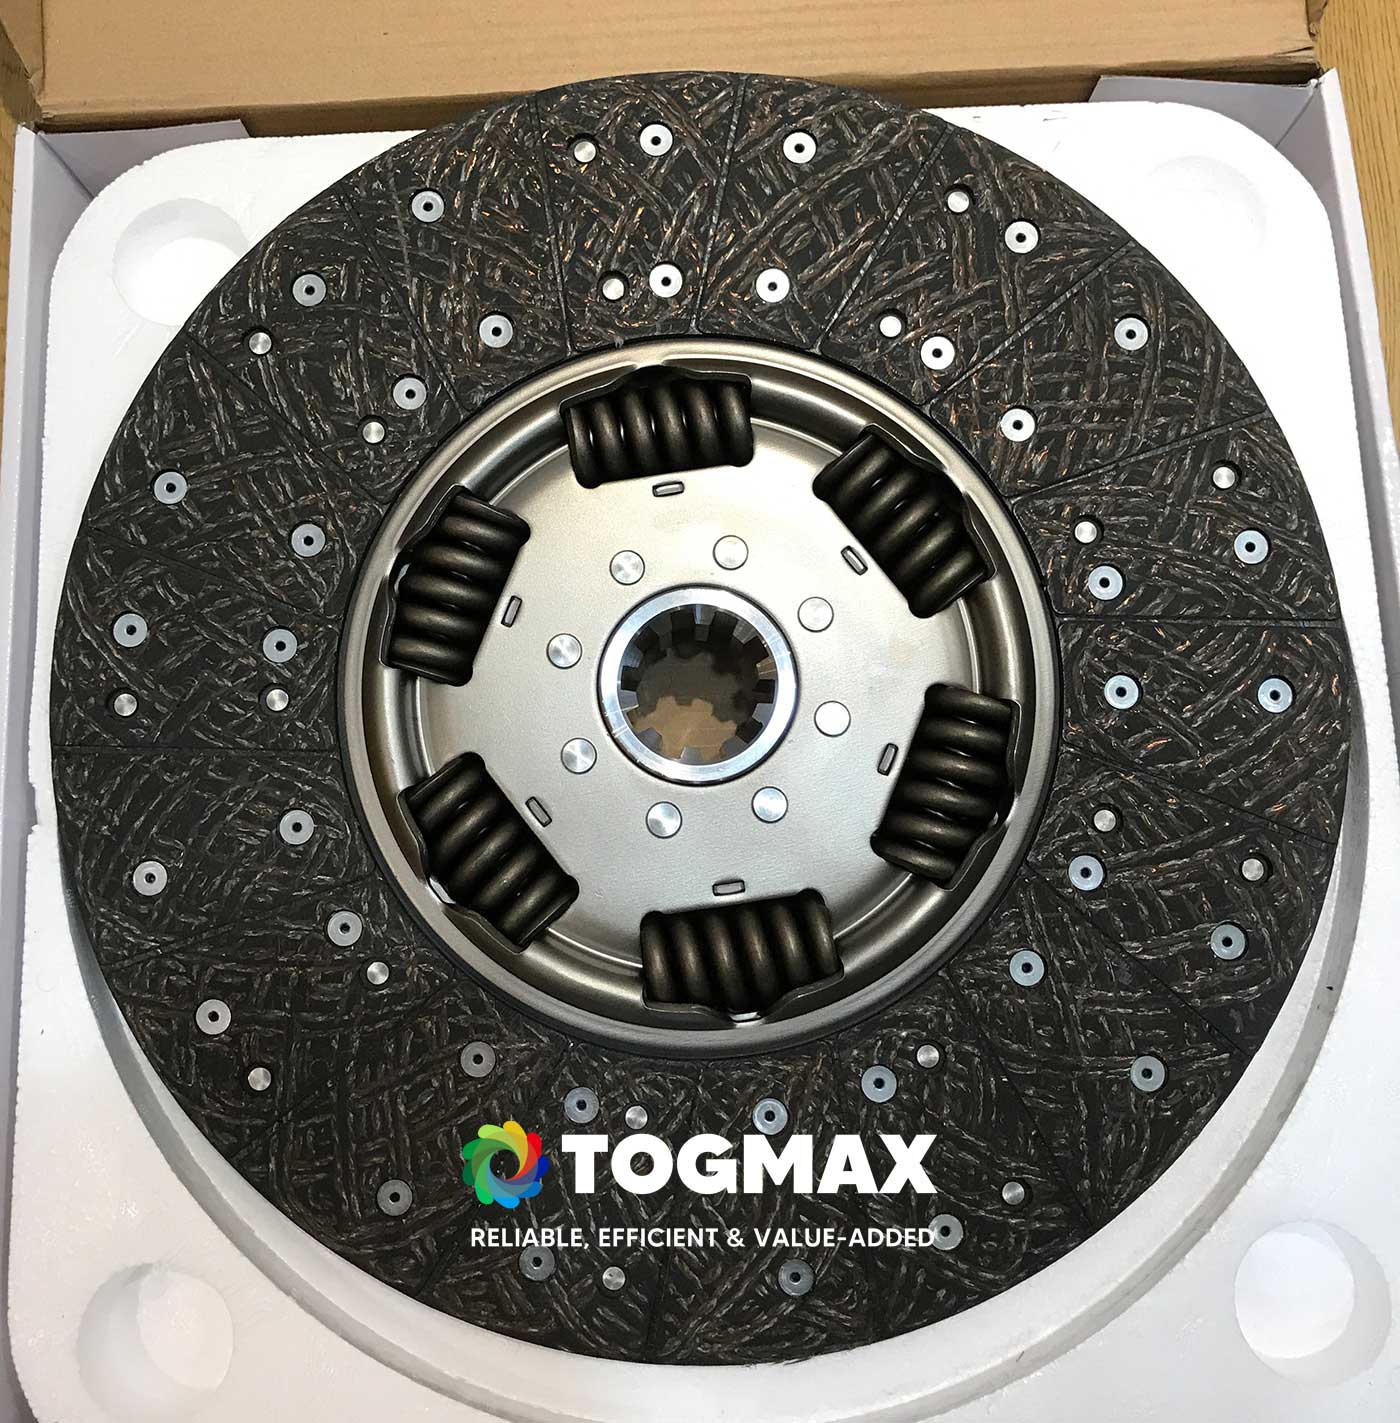 WIZEVER Original China Beiben Sinotruk Dongfeng 430 Heavy Duty Truck Clutch Disc Plate Assembly 430x240x50.8-10 1878080037 Vendor Togmax Group